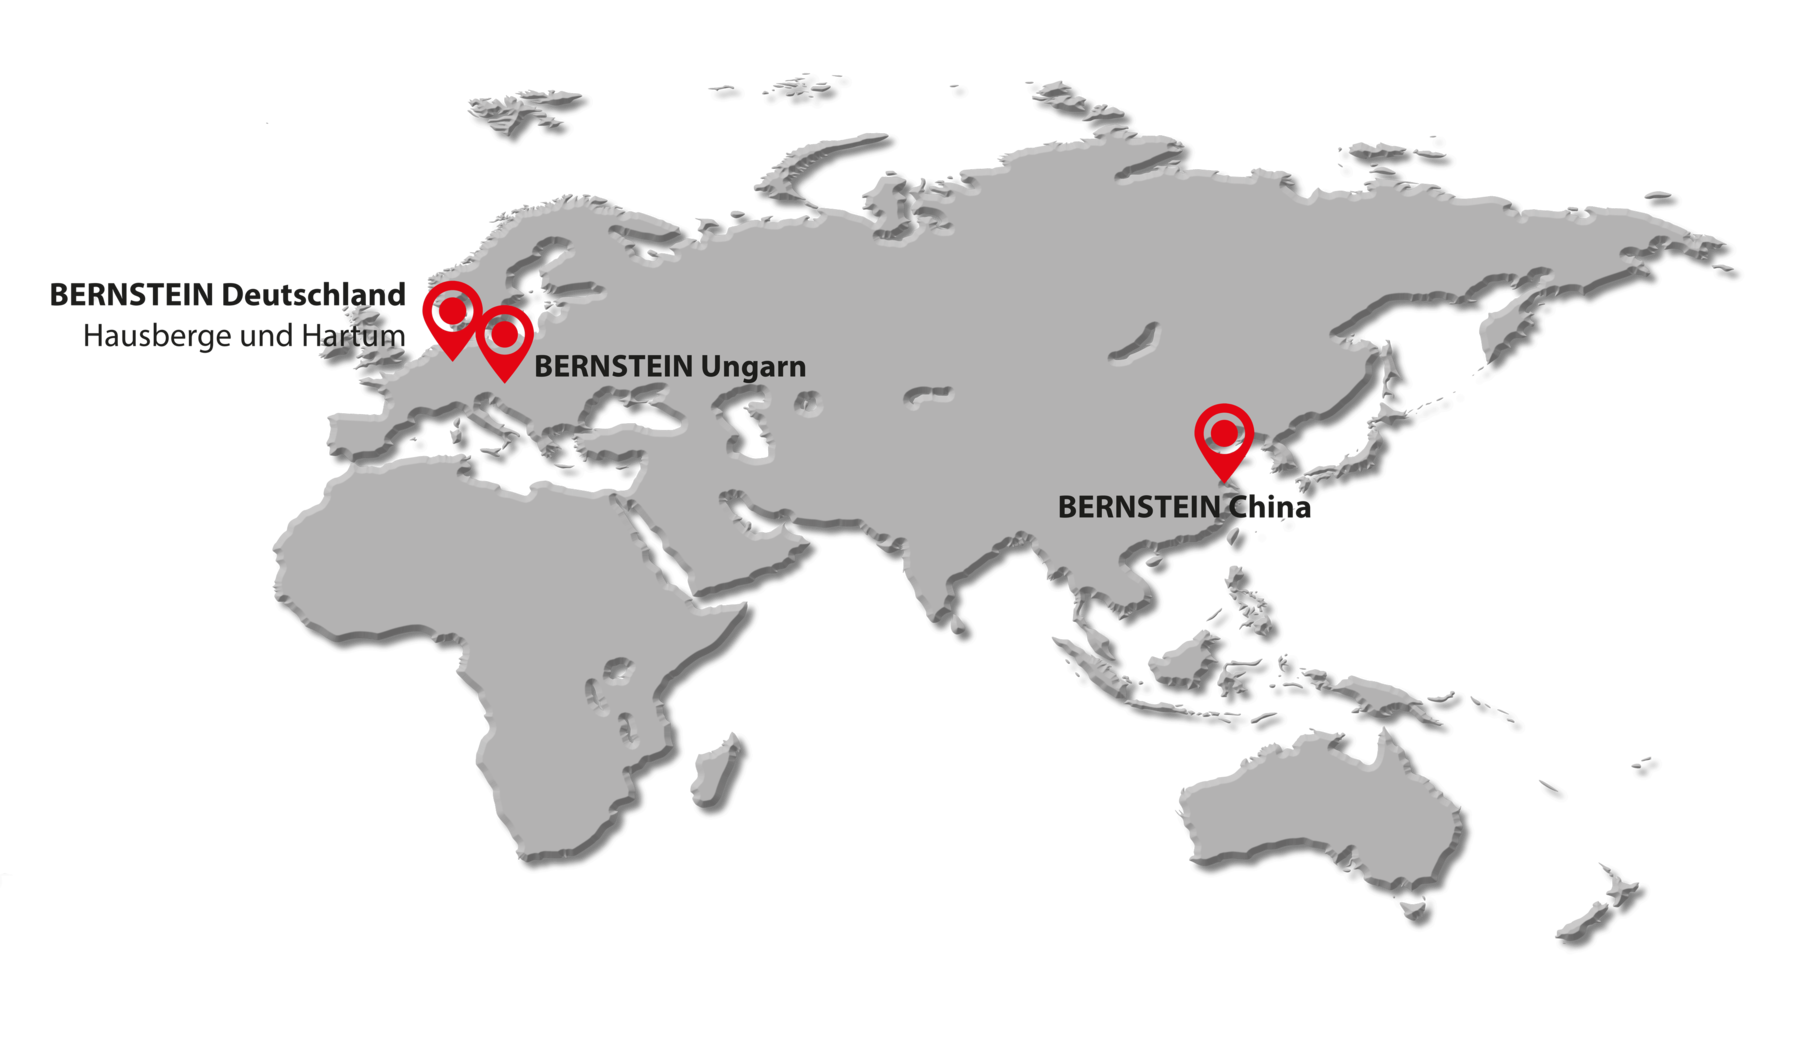 BERNSTEIN locations: Worldwide production sites of the BERNSTEIN company.